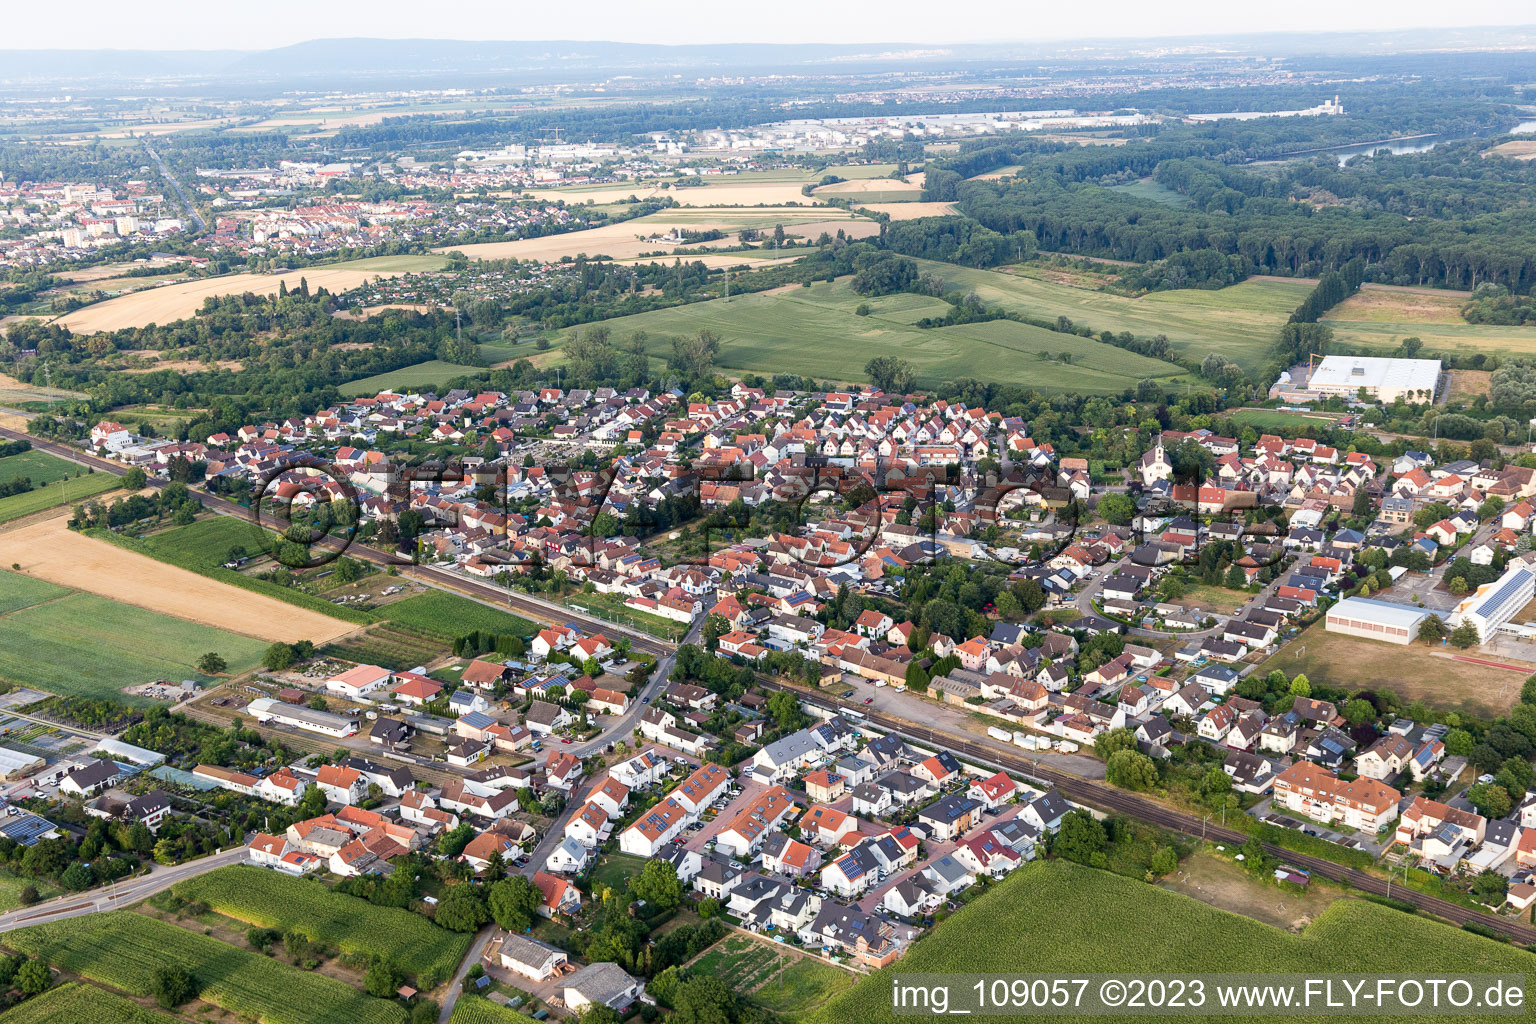 Drone recording of District Berghausen in Römerberg in the state Rhineland-Palatinate, Germany